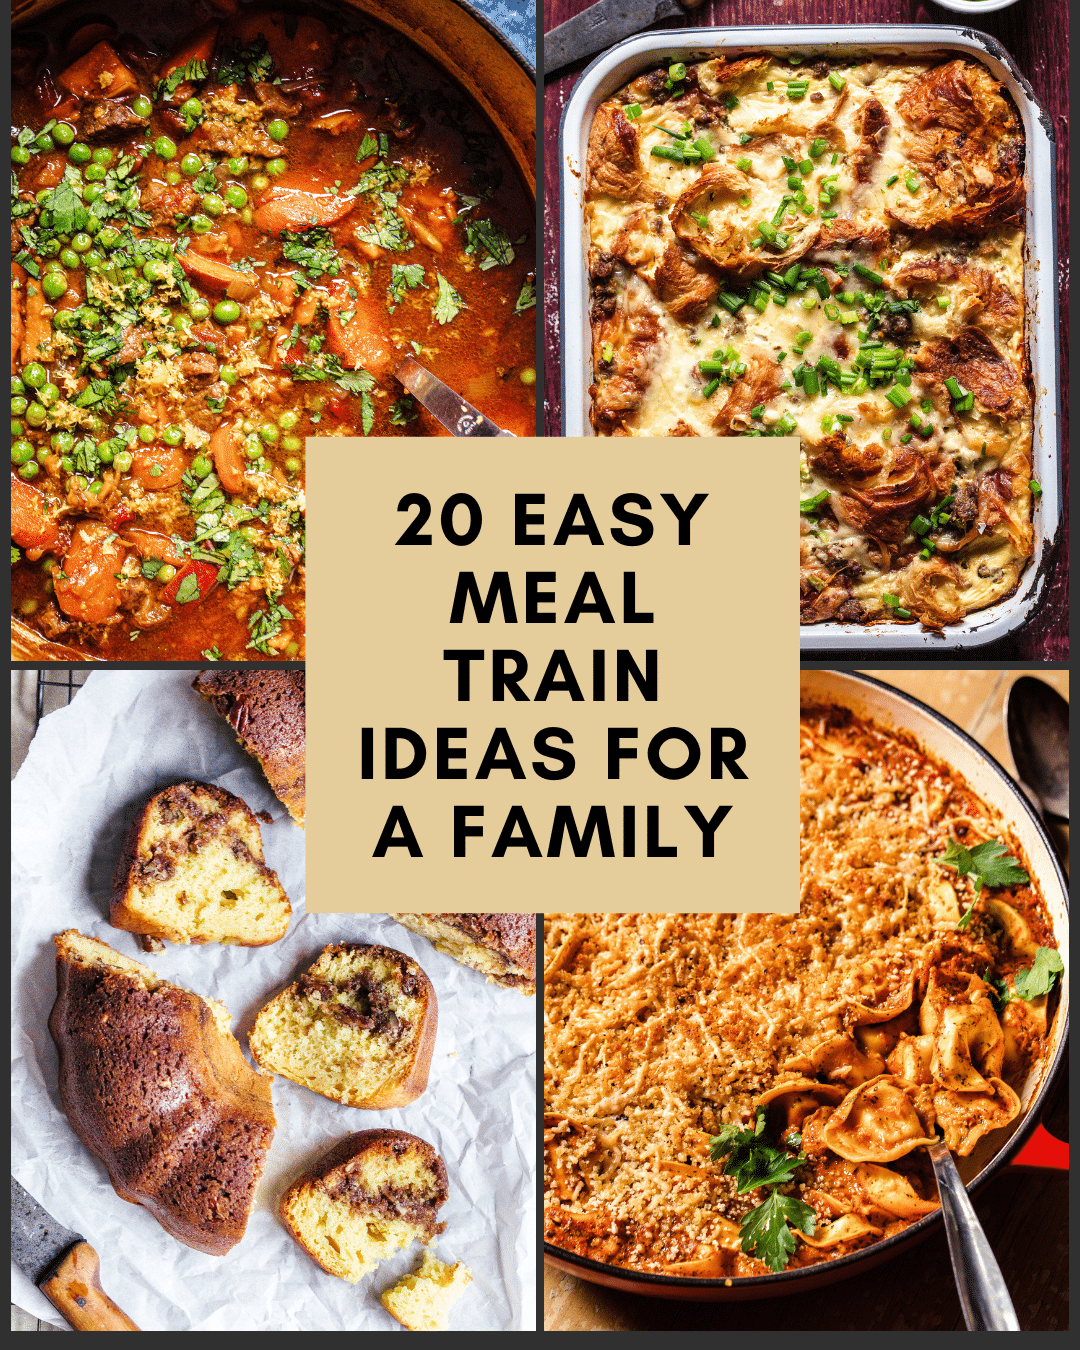 Meal Train Ideas for a Family